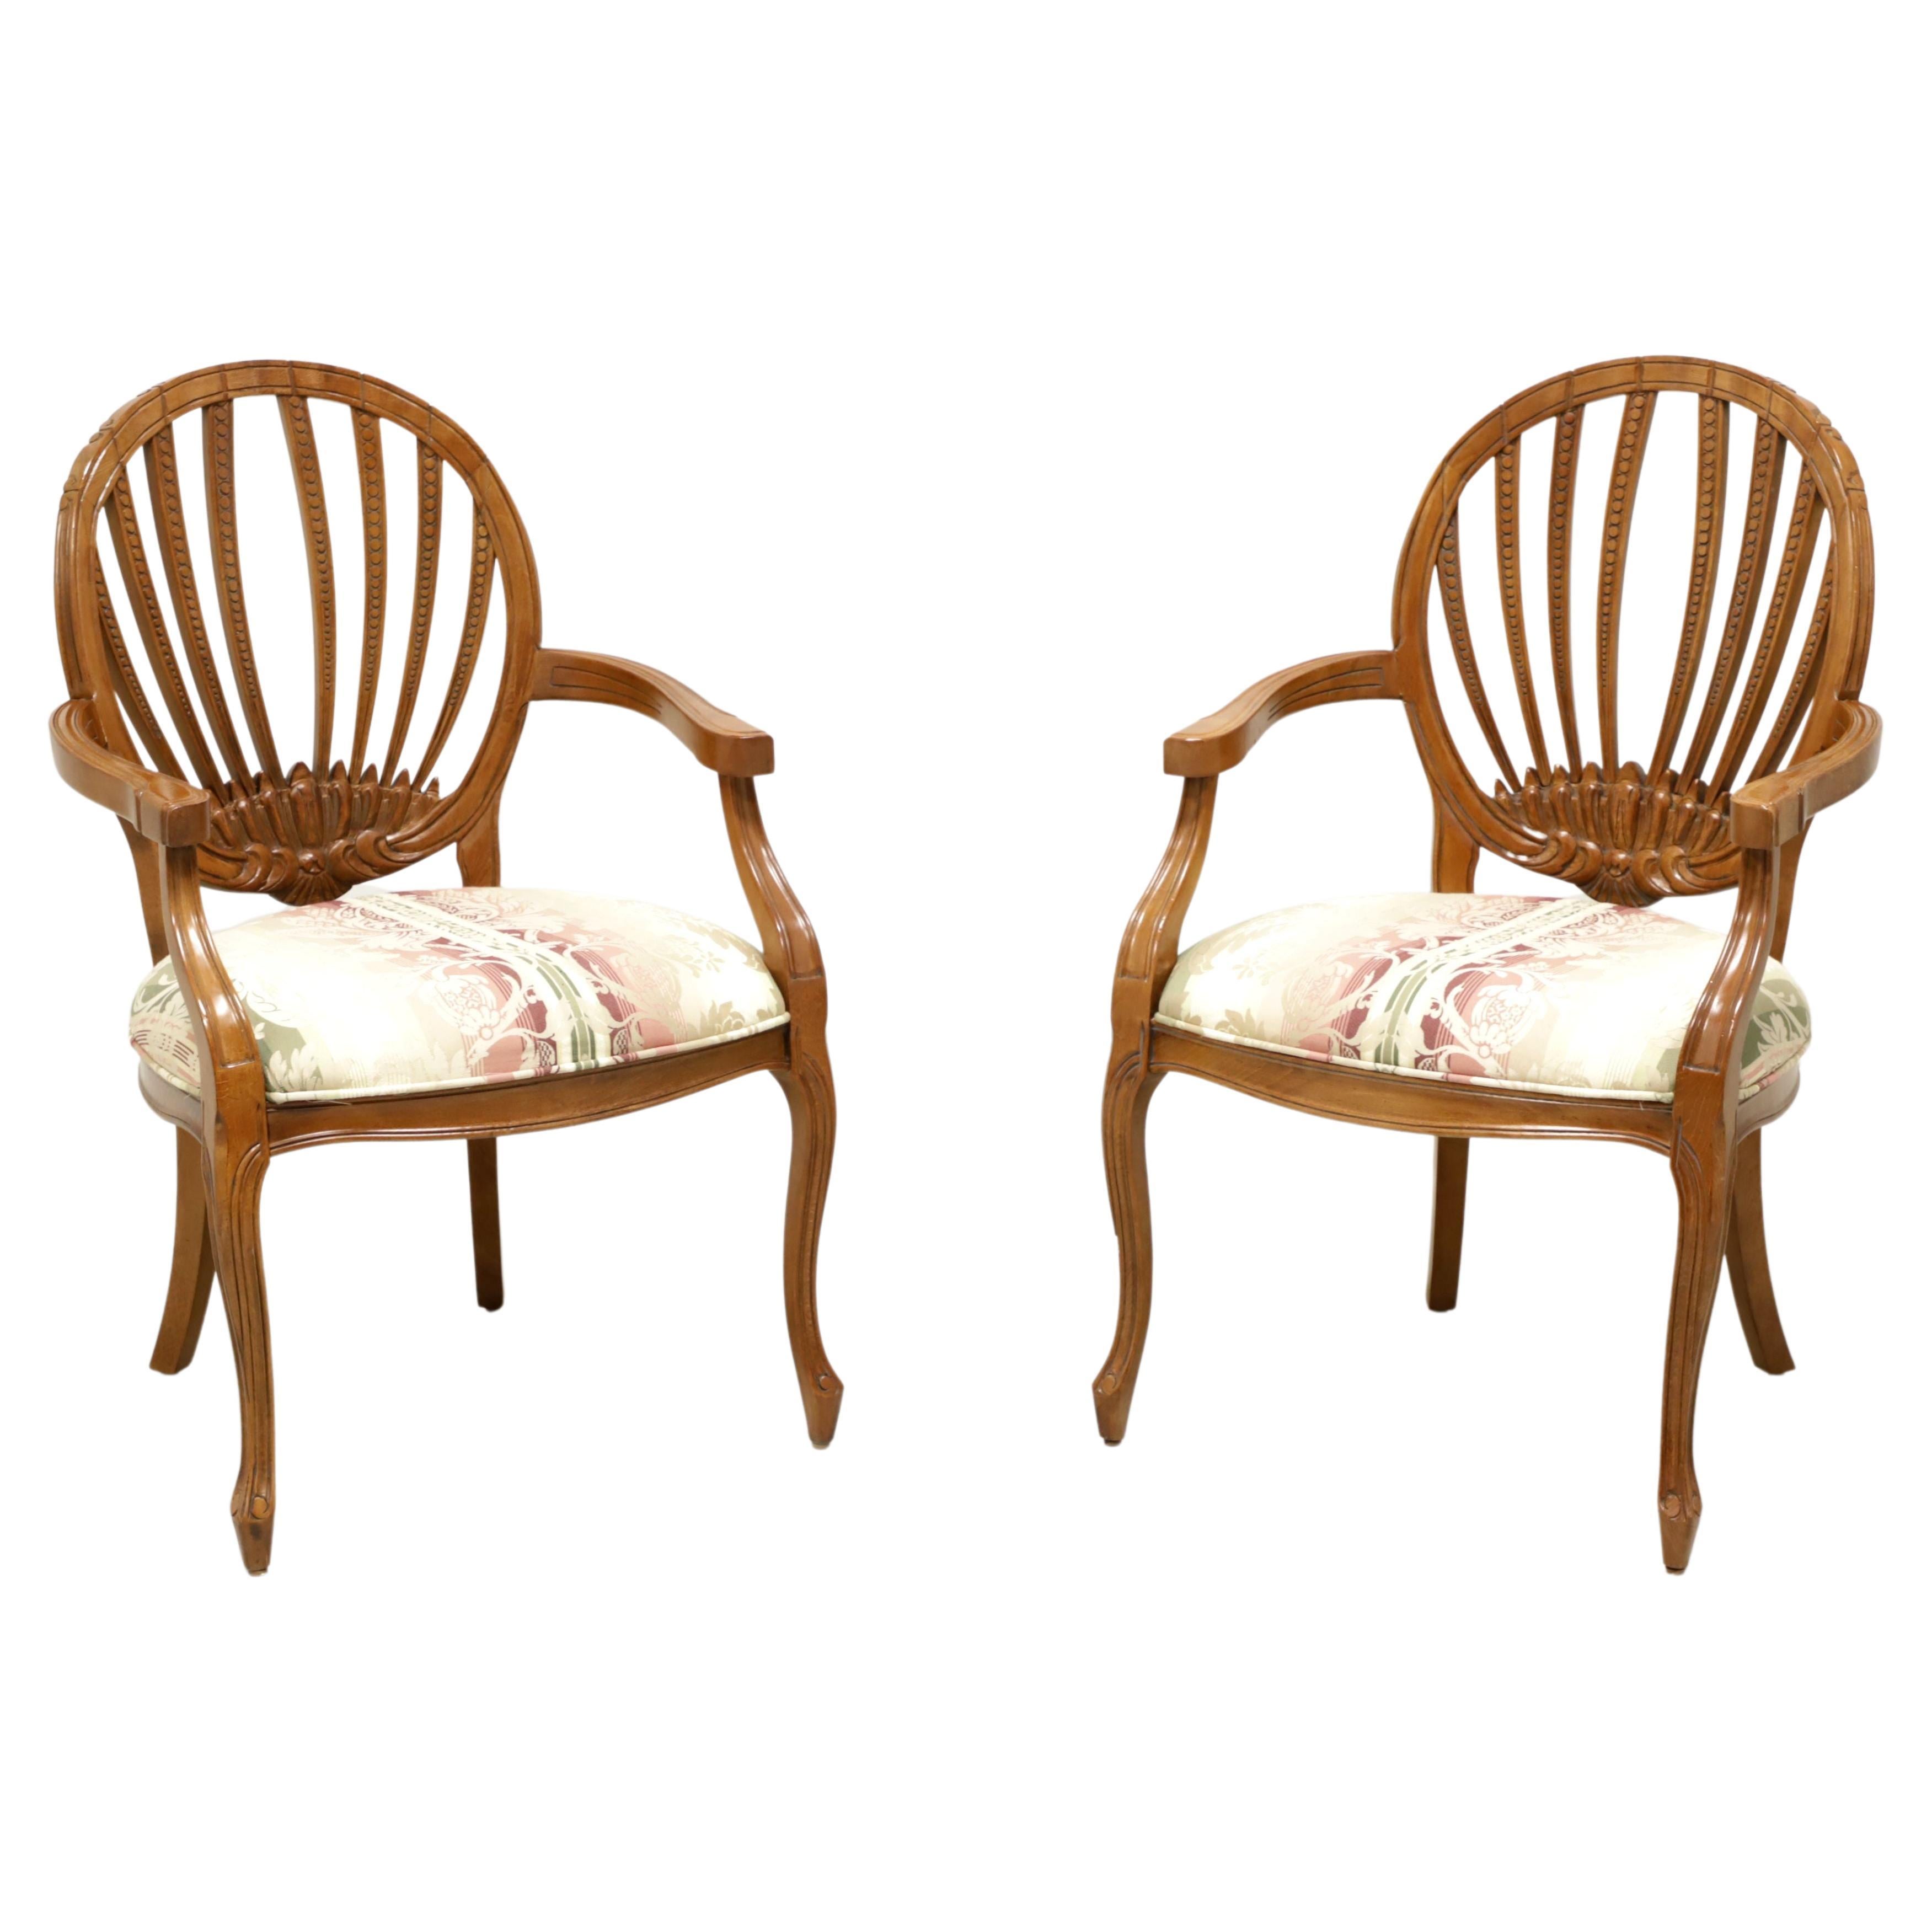 CENTURY French Country Oval Back Dining Armchairs - Pair For Sale